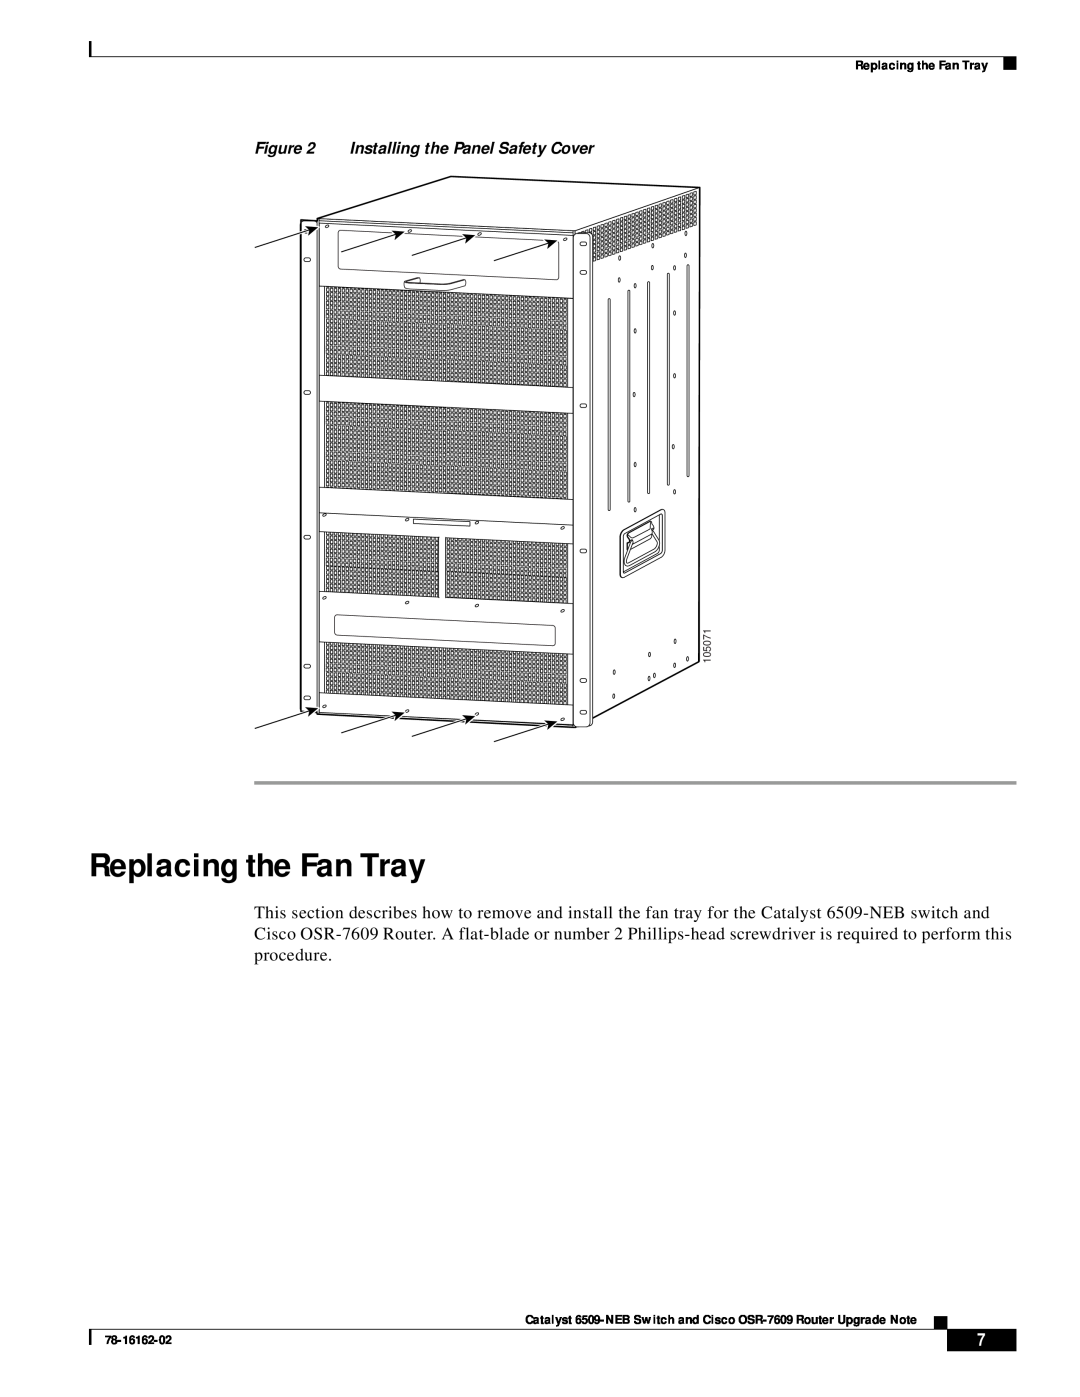 Cisco Systems OSR-7609, 6509-NEB manual Replacing the Fan Tray, Installing the Panel Safety Cover, 78-16162-02, 105071 